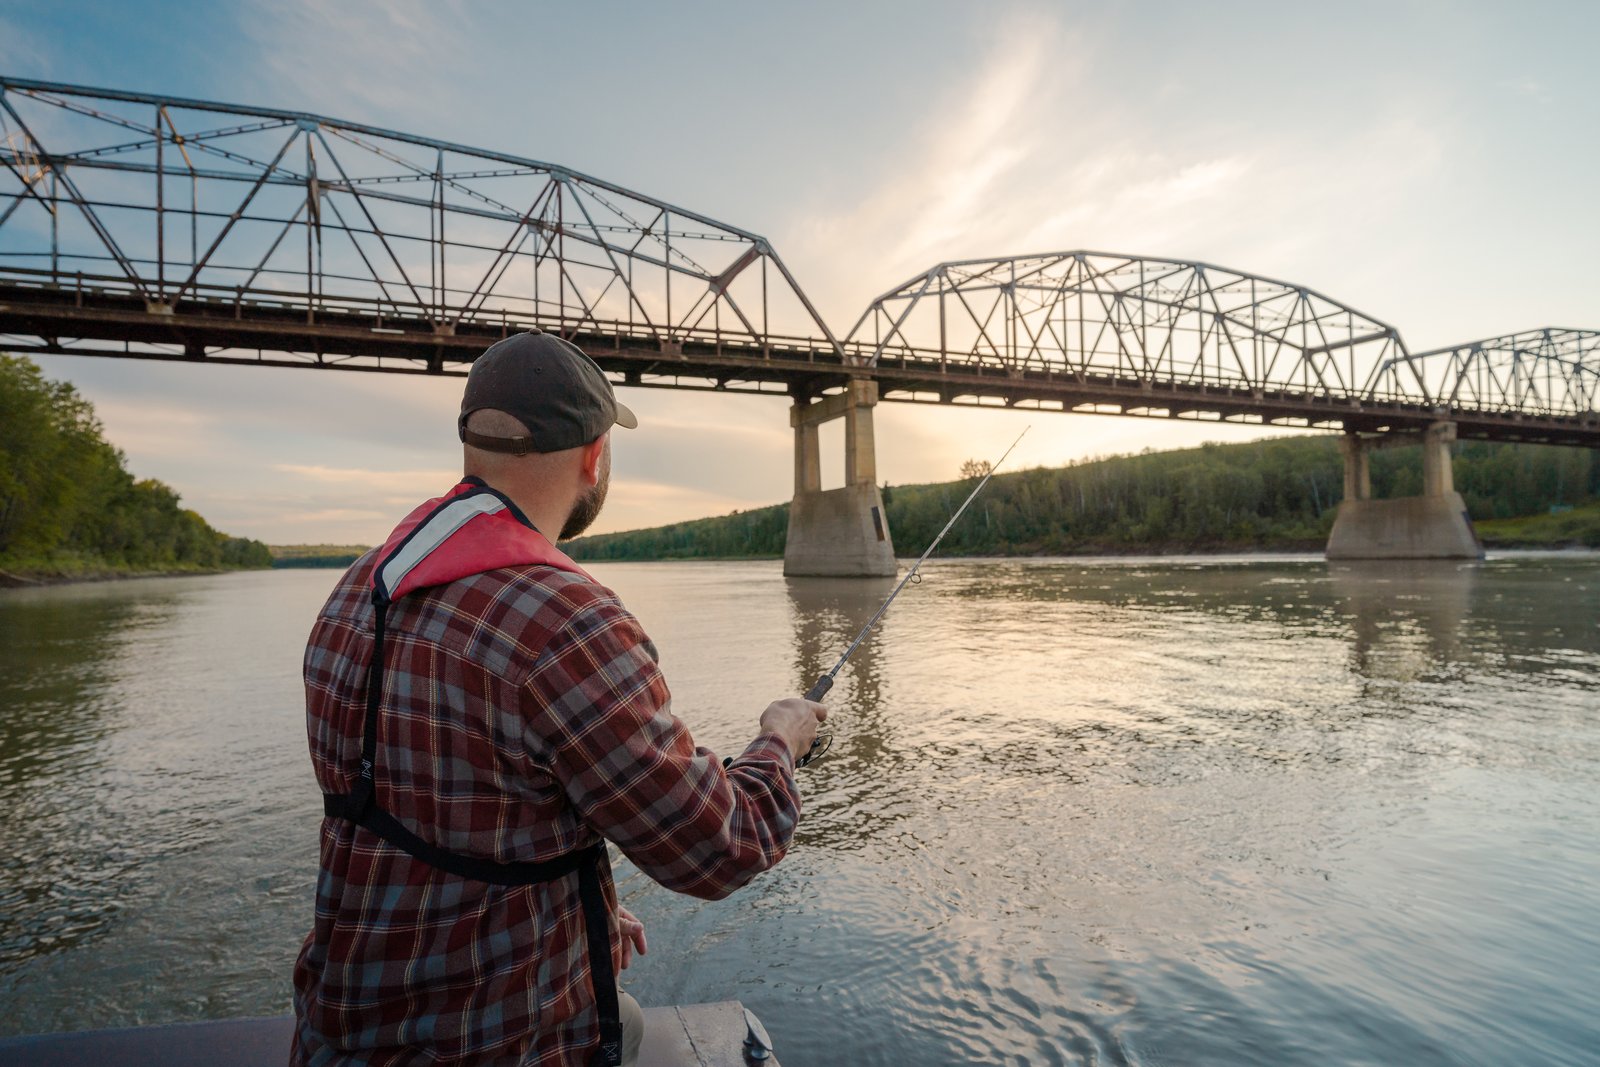 Man fly fishing on the Peace River with a bridge in the background.